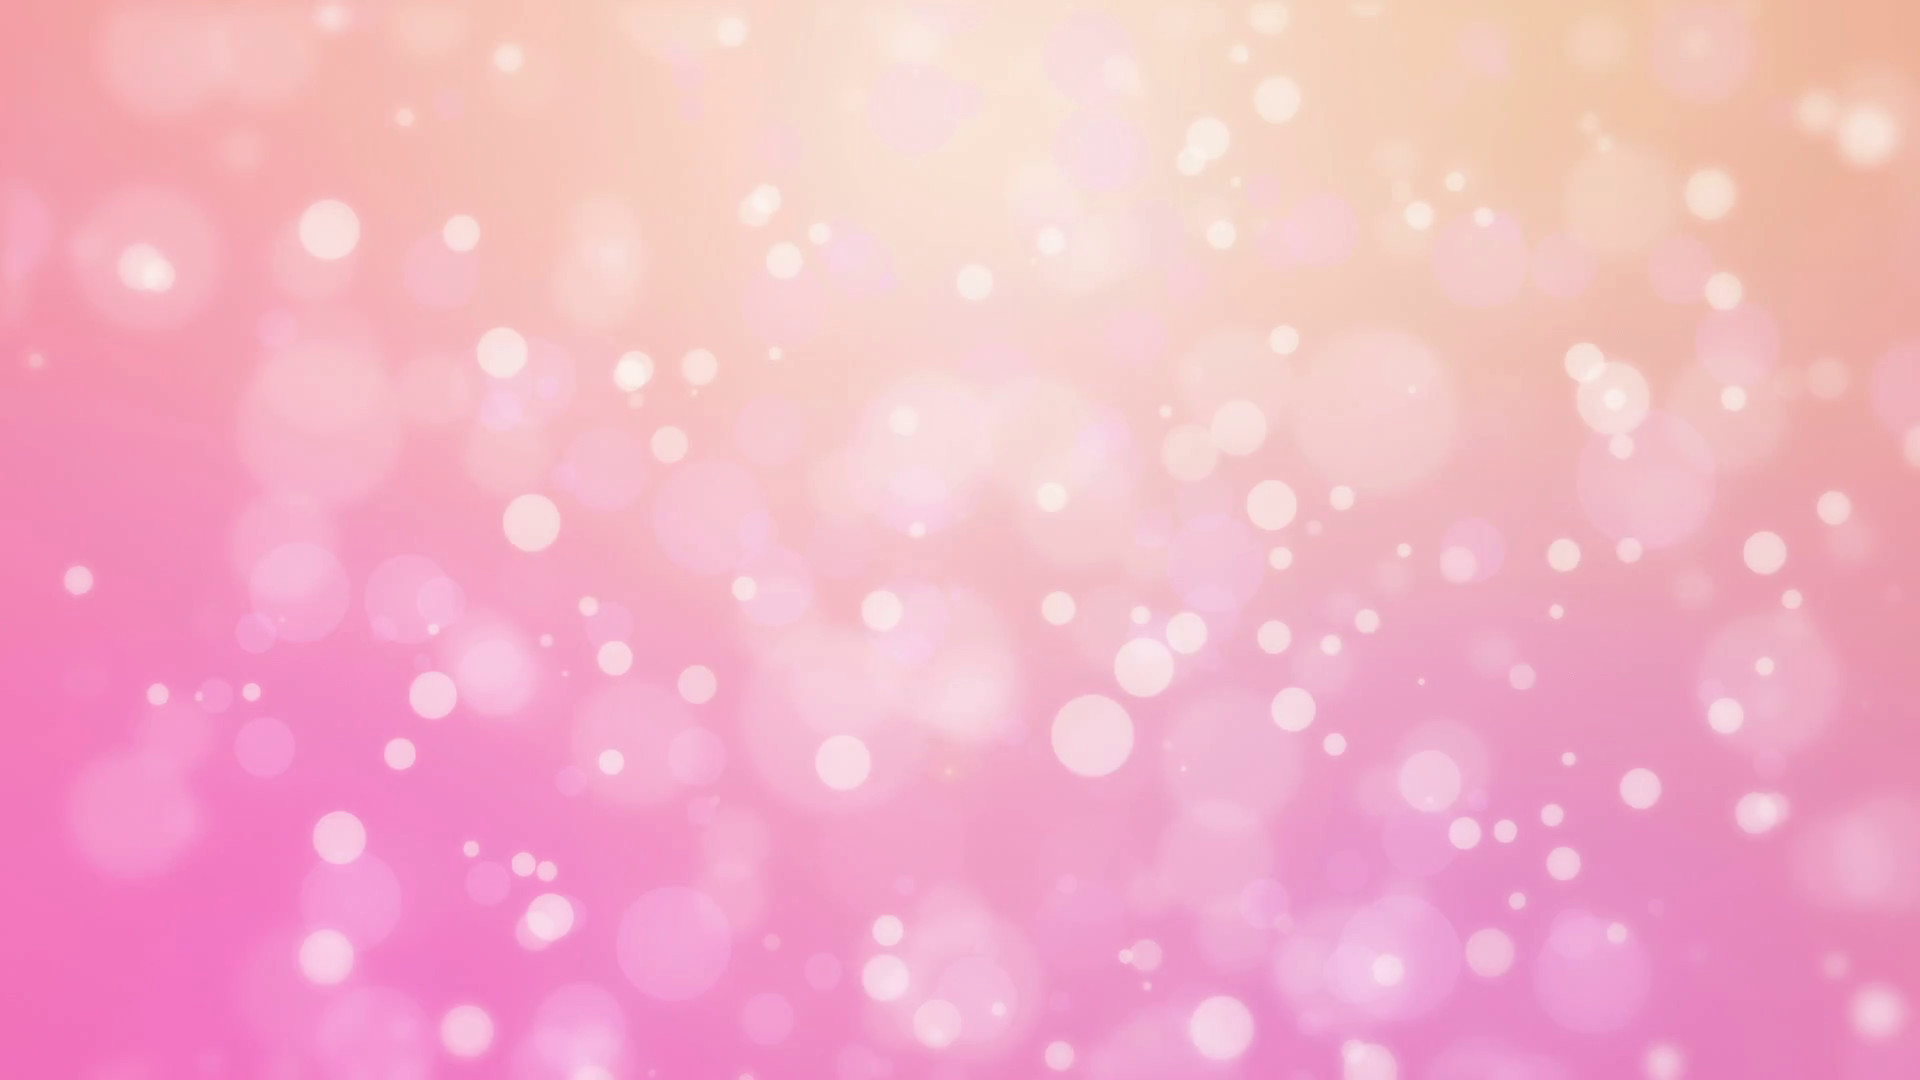 1920x1080 Sweet romantic pink orange gradient animated background with floating  glowing bokeh lights Motion Background - VideoBlocks